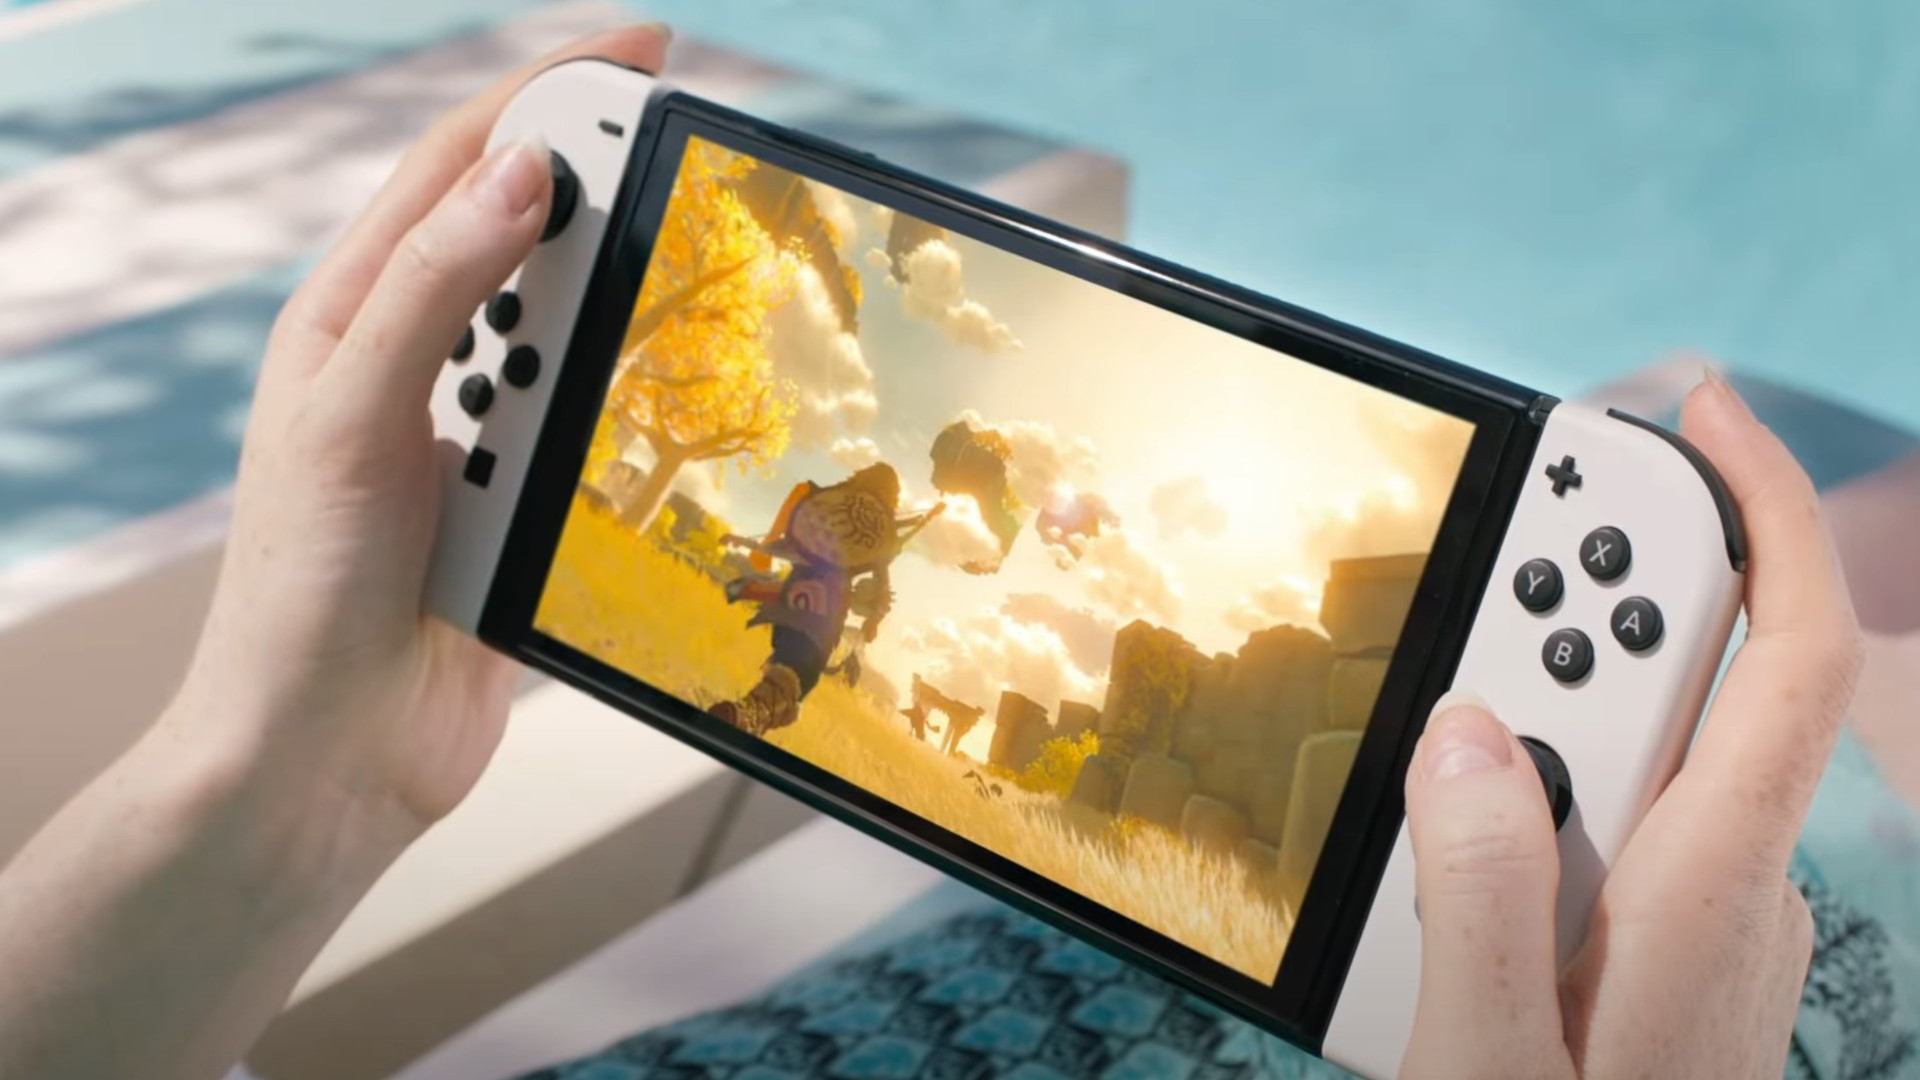 Press image of the Nintendo Switch OLED showing Breath of the Wild 2